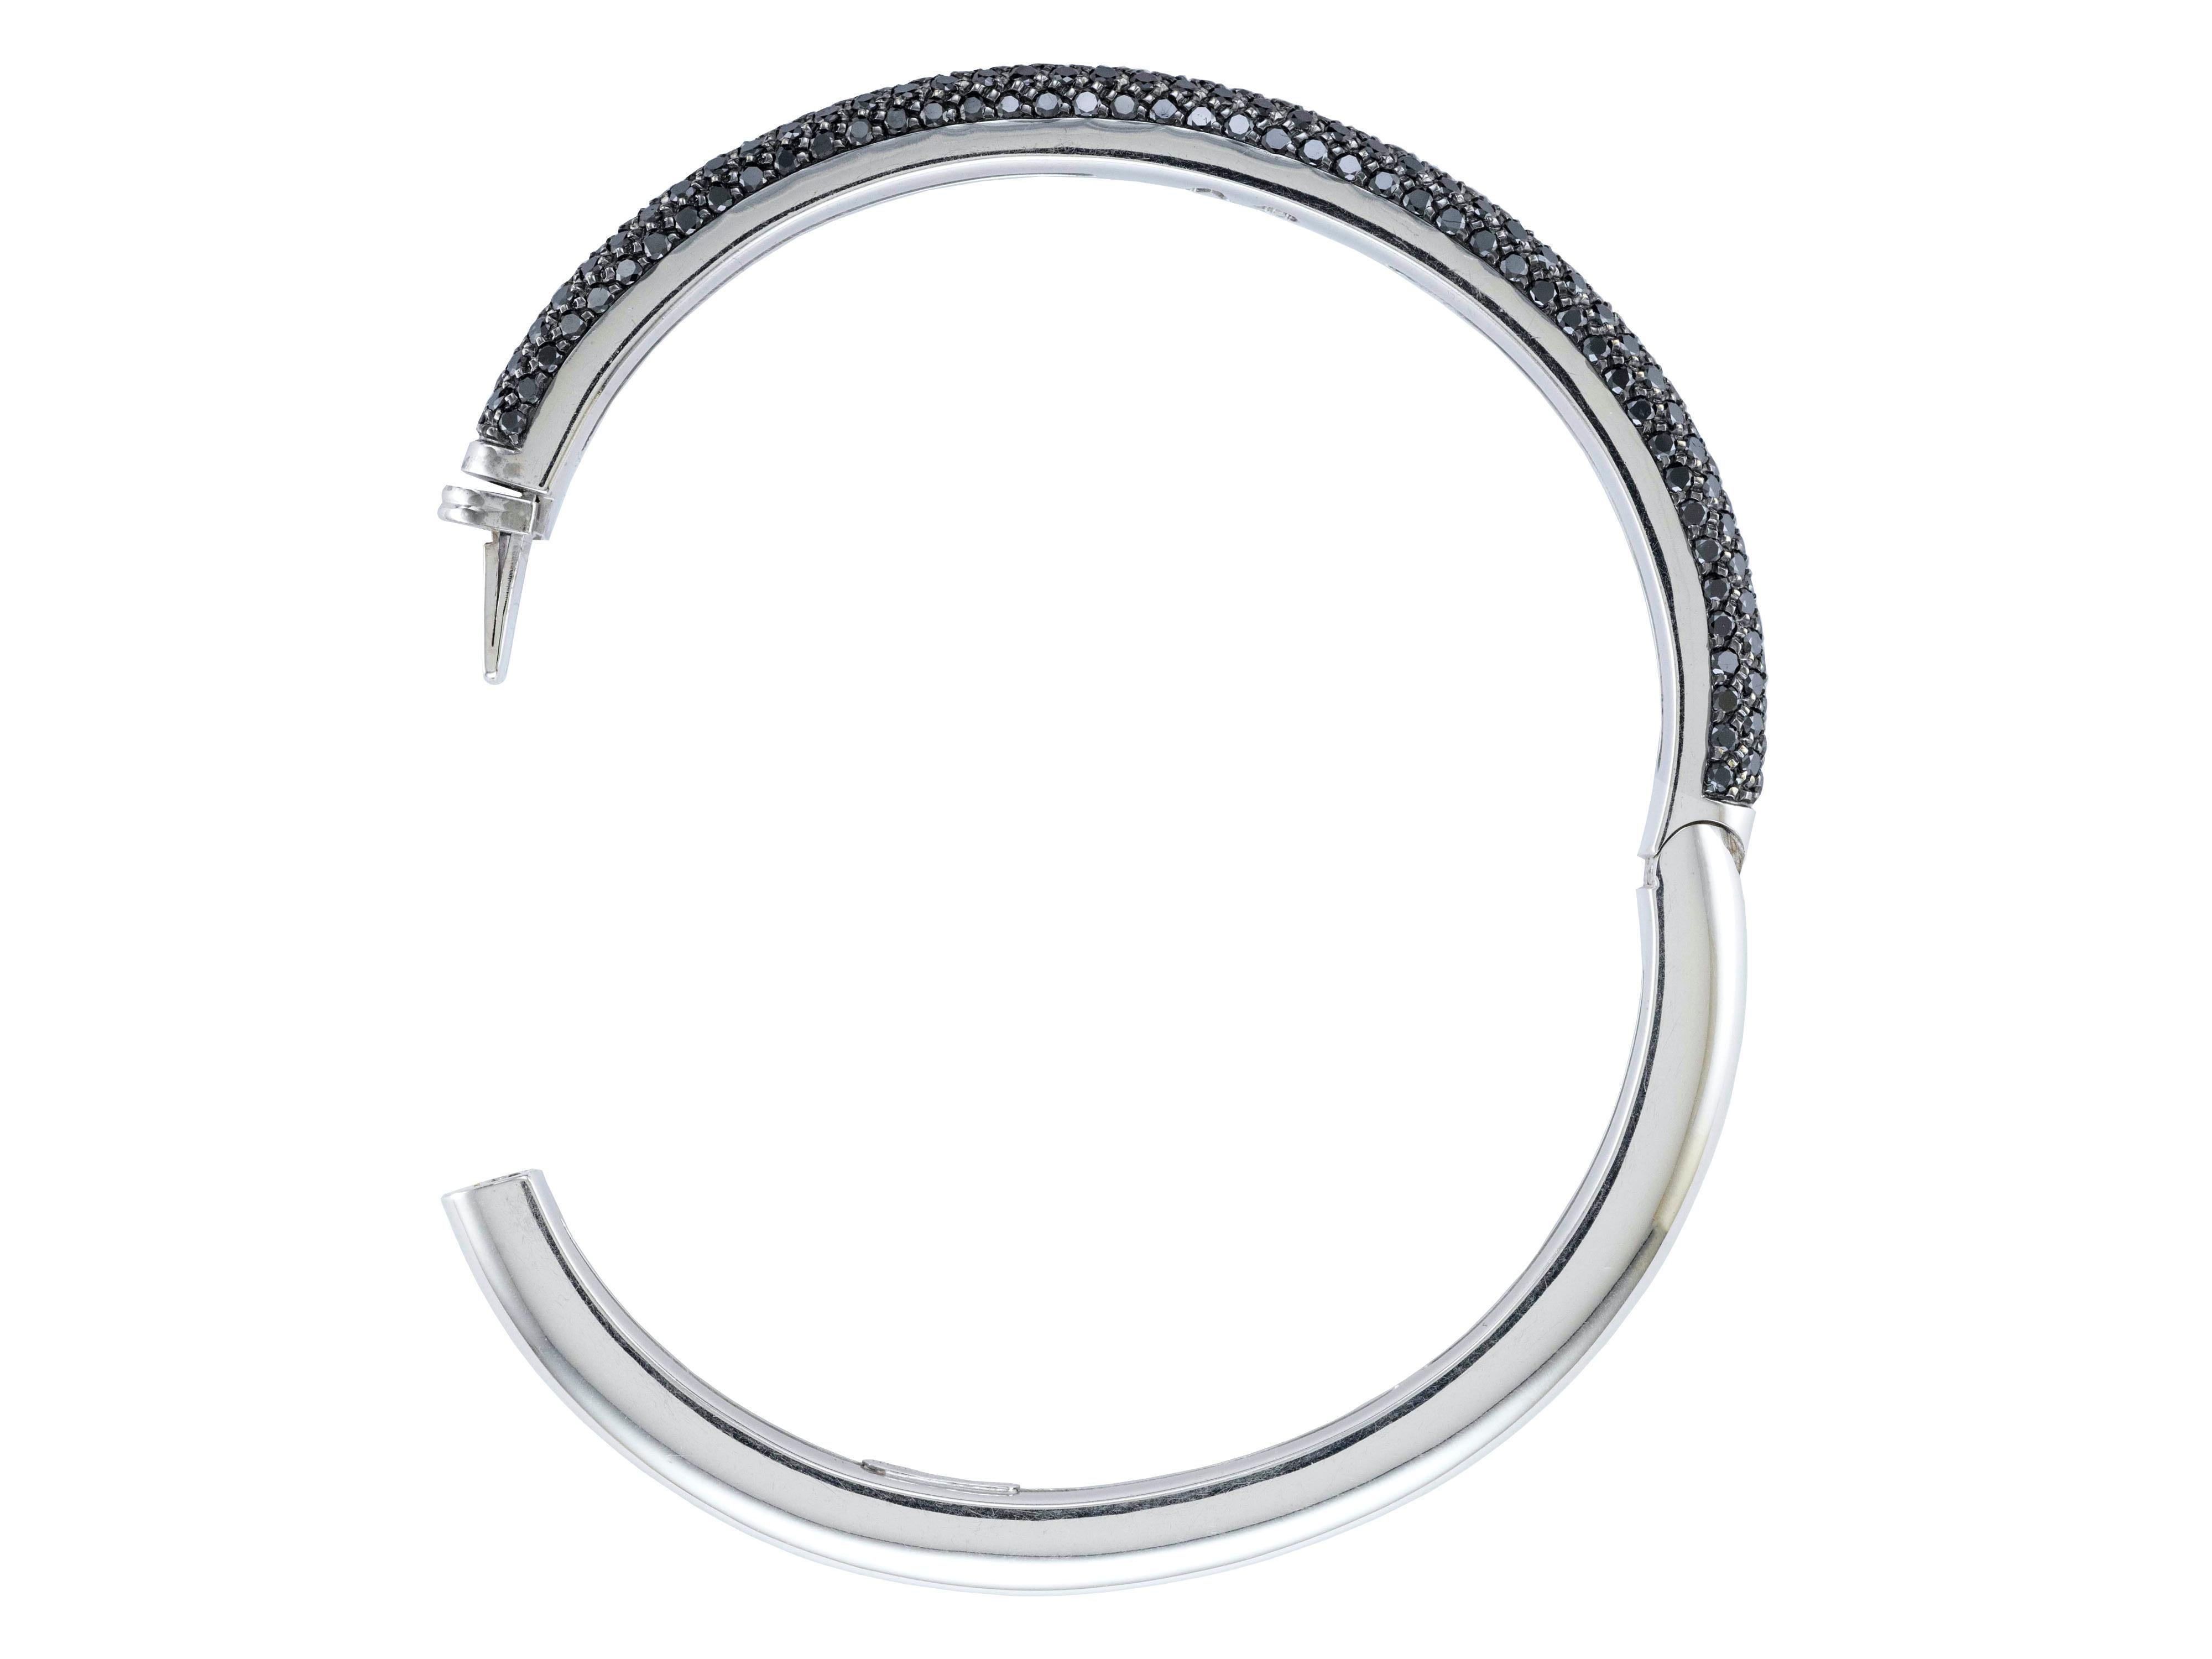 Solid 18 Karat white gold bangle embellished with five rows of black Diamonds pave for ct. 3.92
Made in Italy by Giorgio Visconti, a brand with a long tradition of jewelry manufacturing.
The bracelet has a plunger clasp and weighs gr 34.00
The